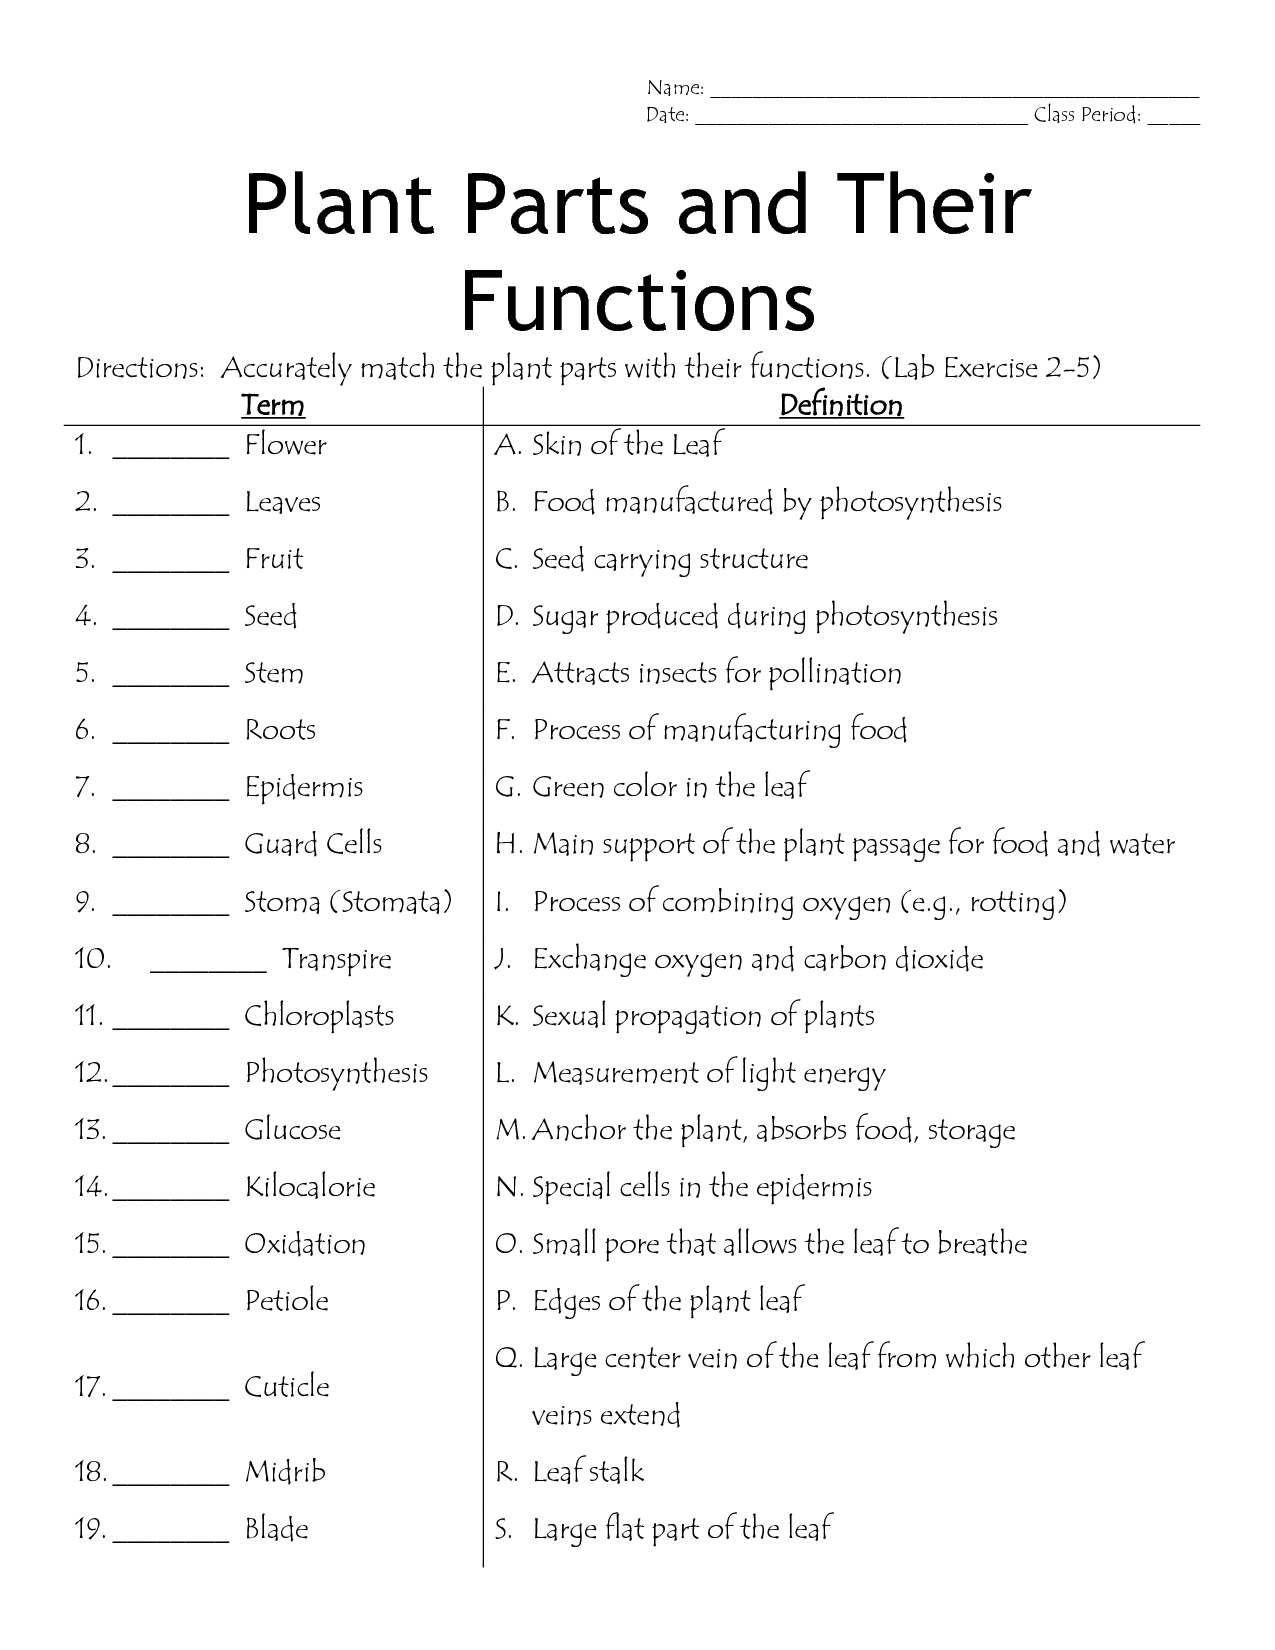 13 Best Images of Plant Structure And Function Worksheet ...